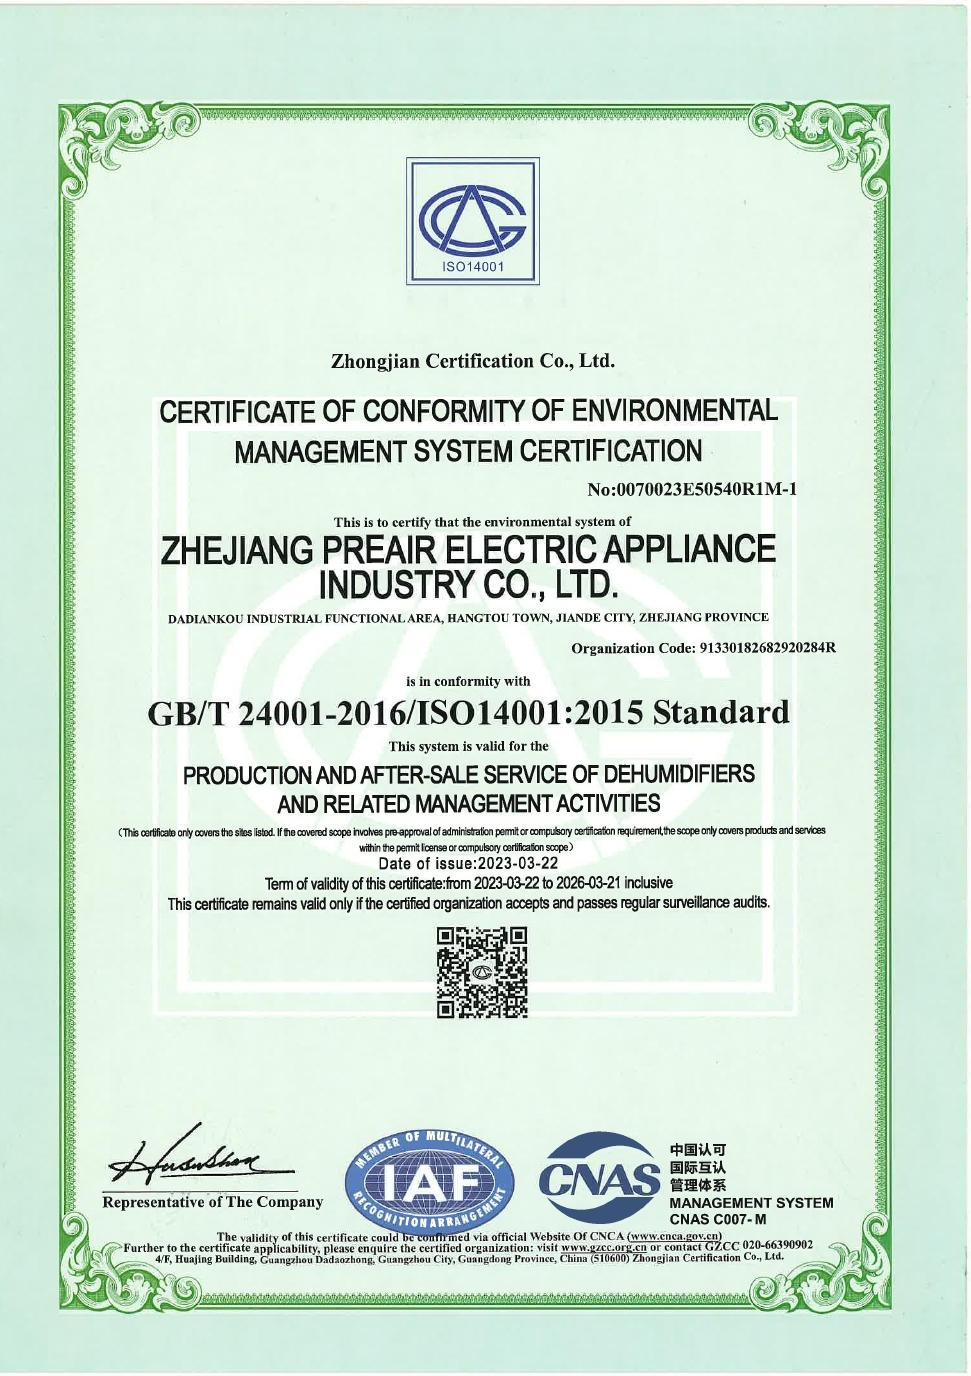 Preair Certificate of Conformity of Environmental Management System Certification